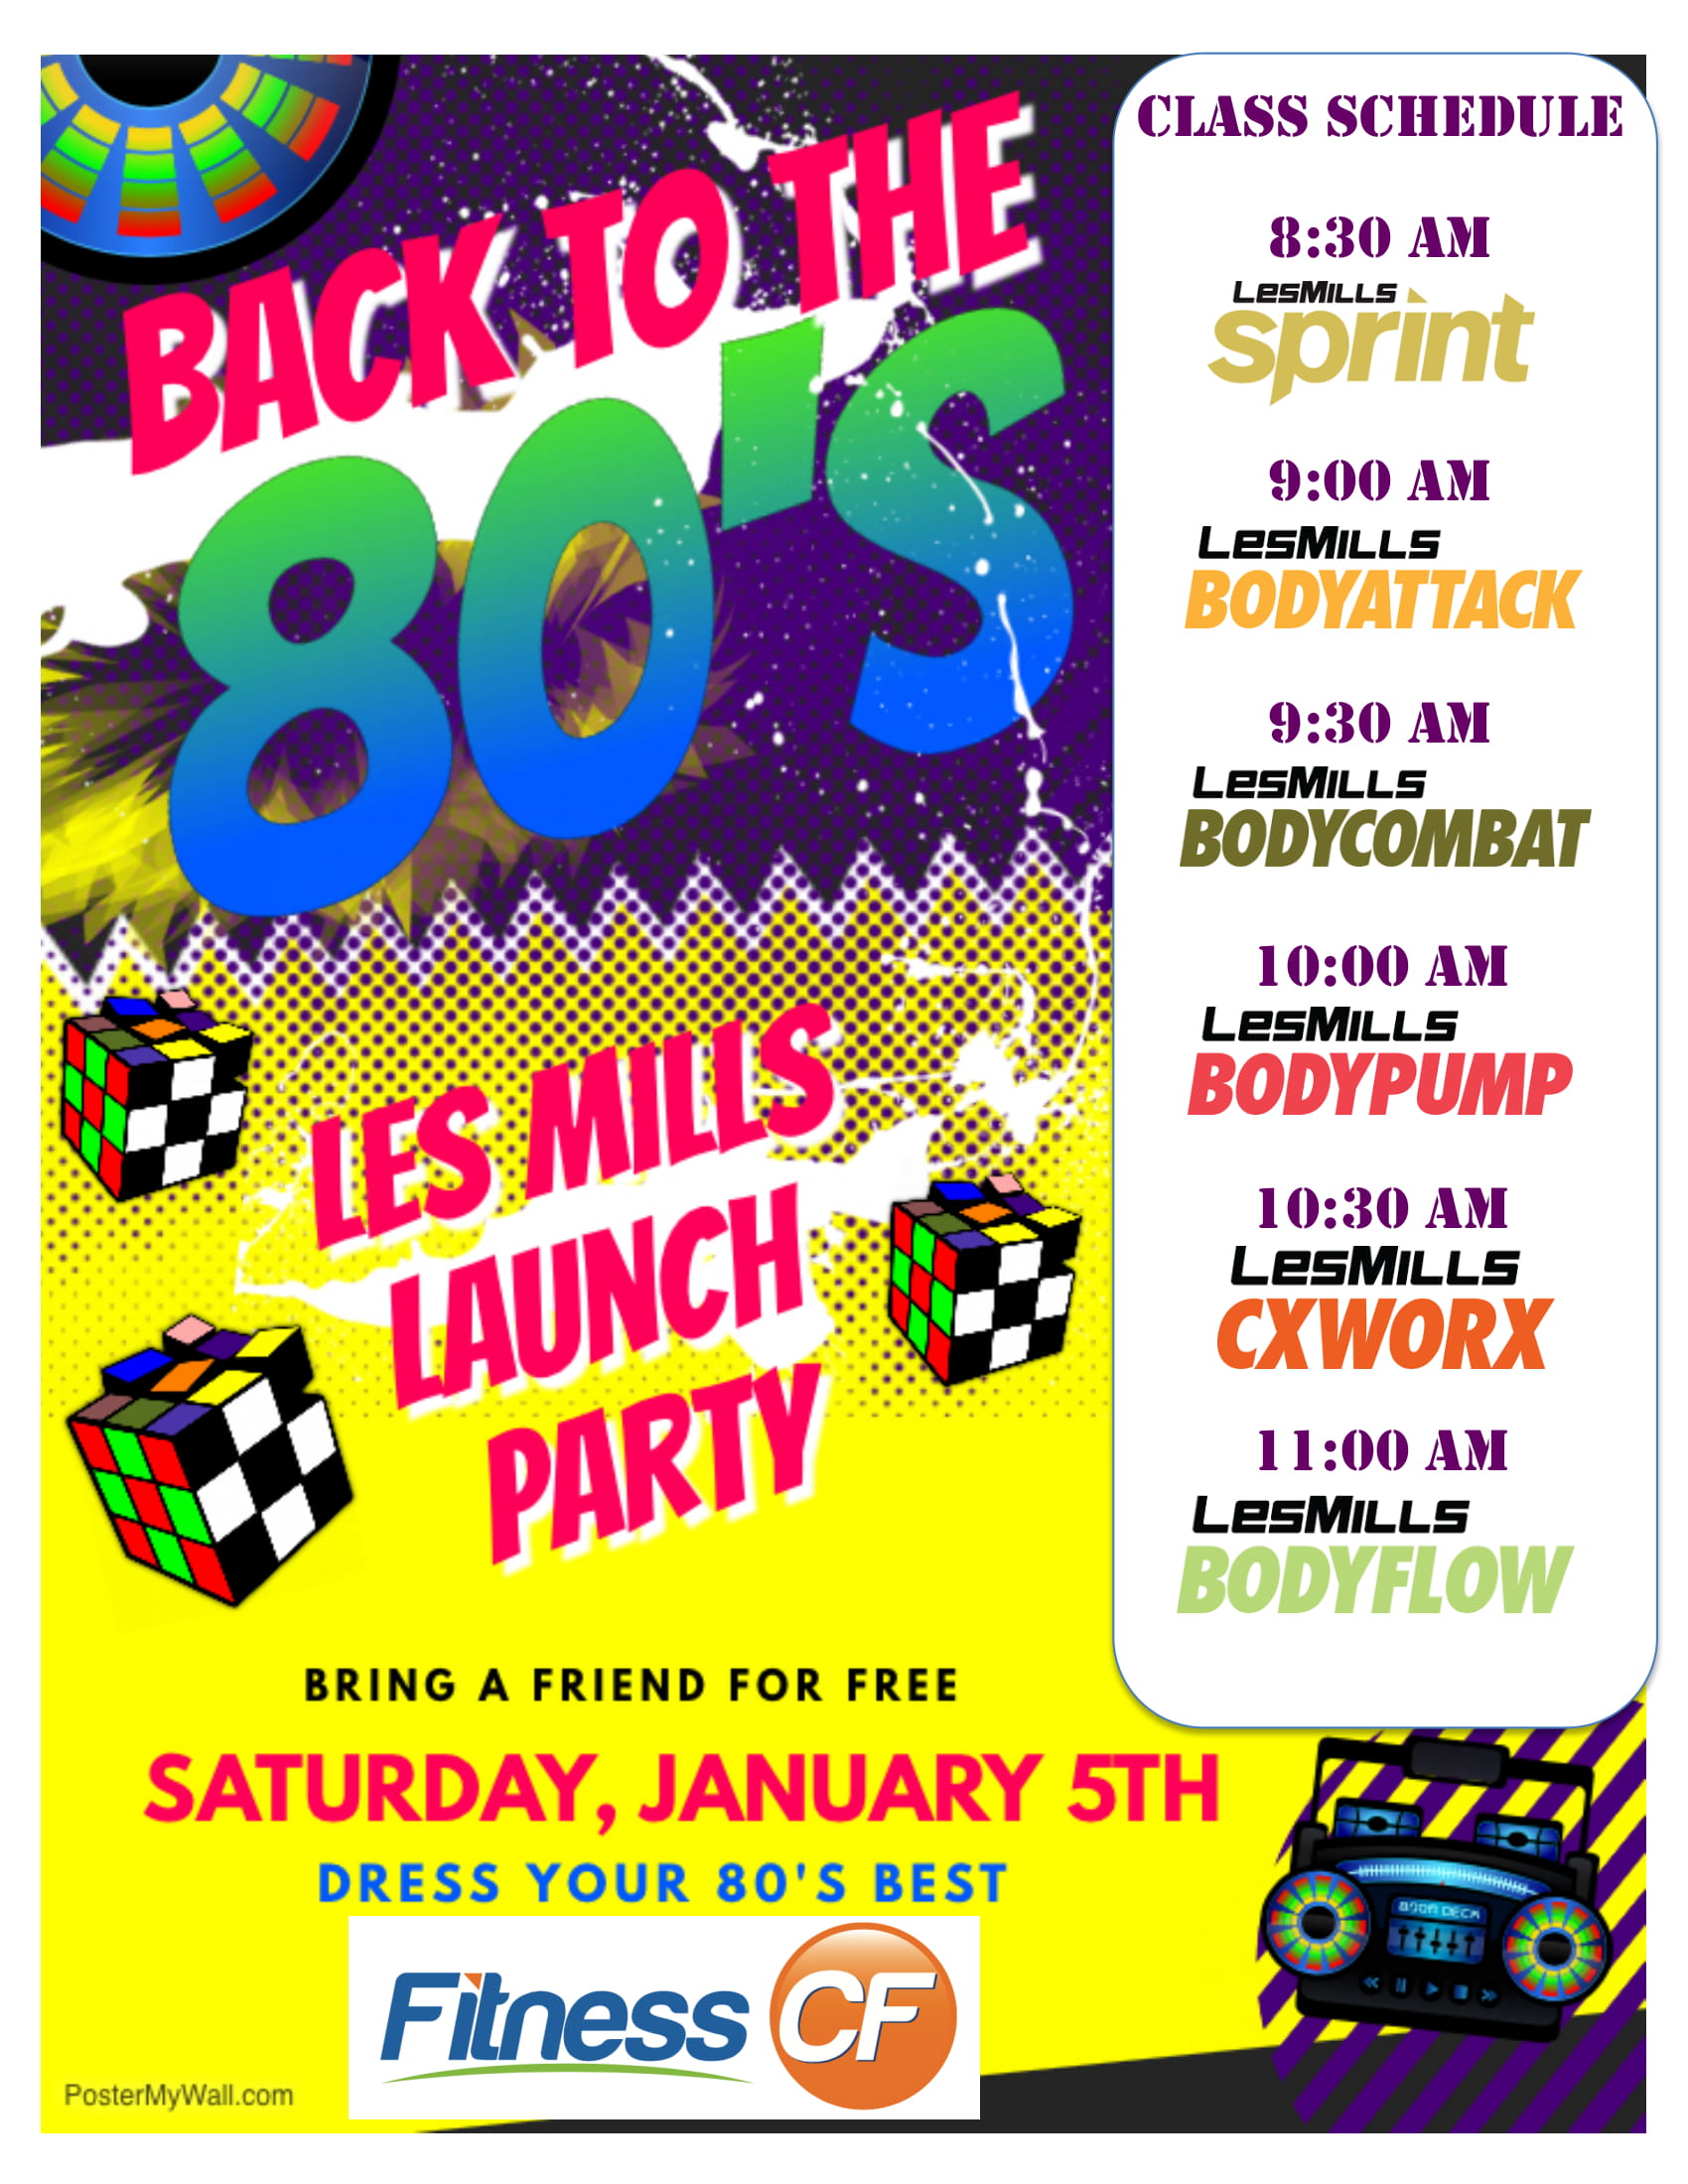 Back to the 80s Les Mills Launch Party!